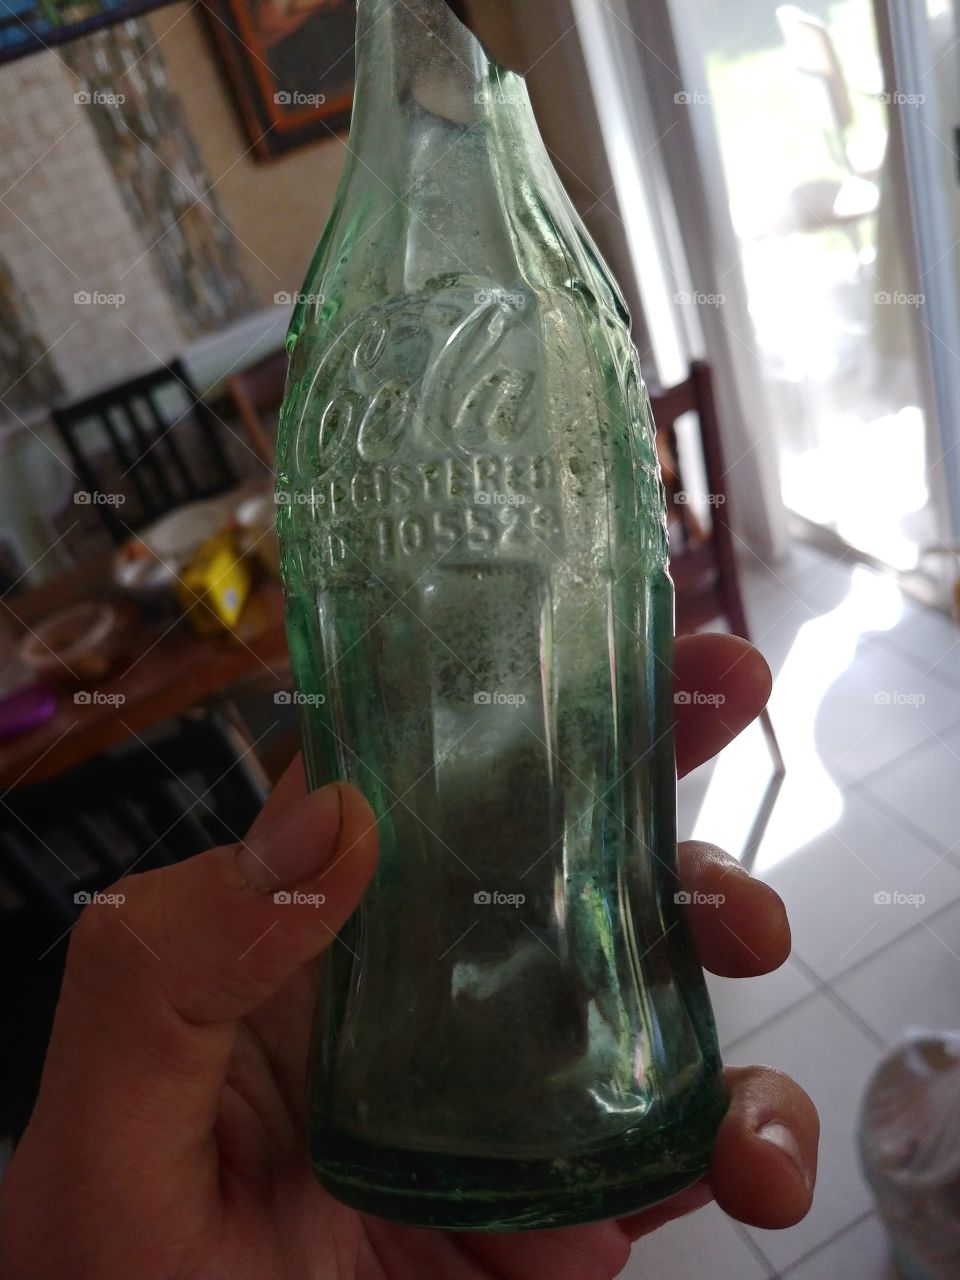 ::Old Coca-Cola bottle my mother found buried in her backyard::